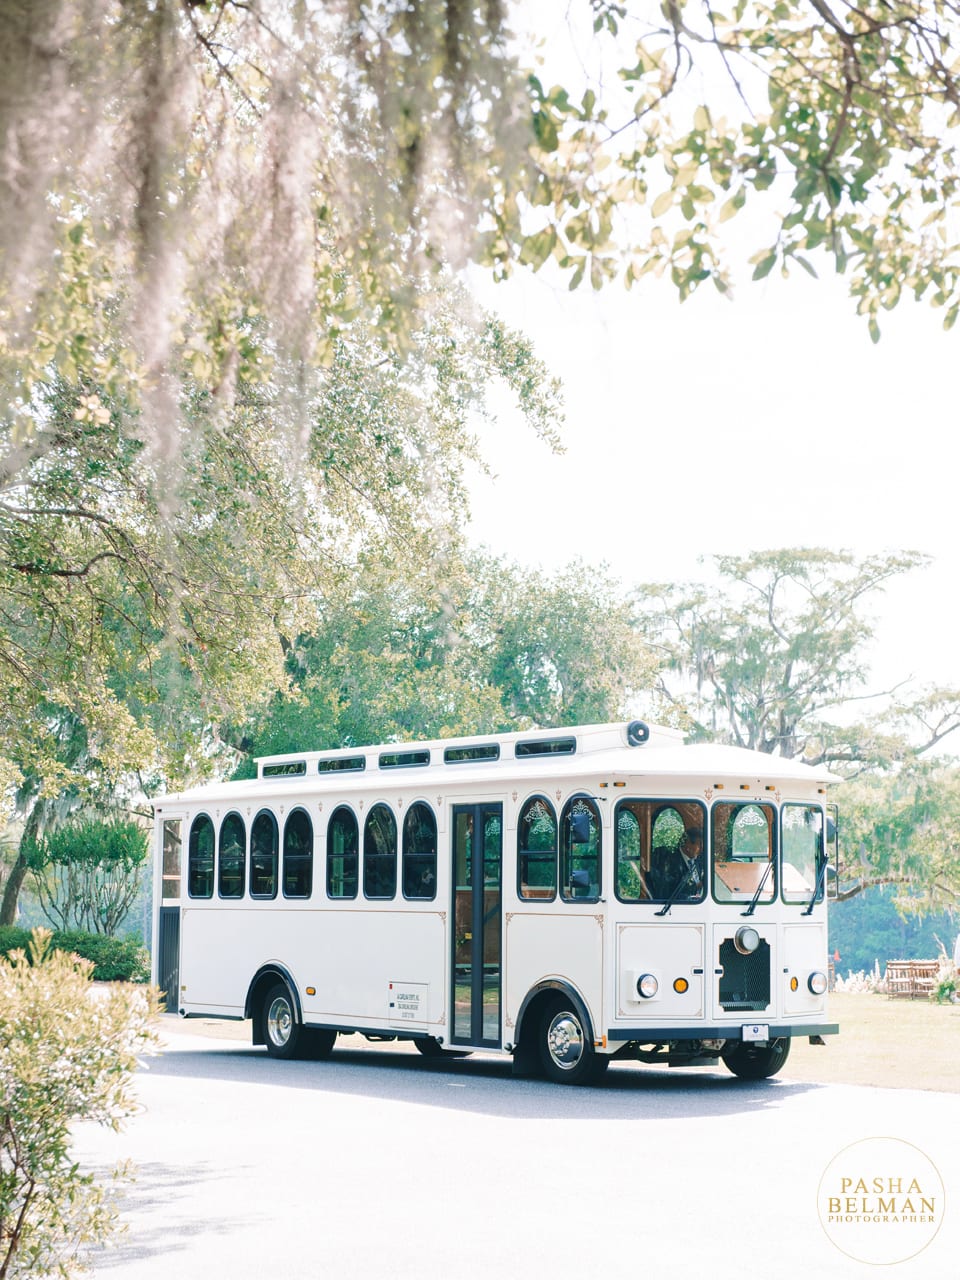 Fun wedding day transportation for the bridal party. Trolley has enough room for your entire wedding party in South Carolina